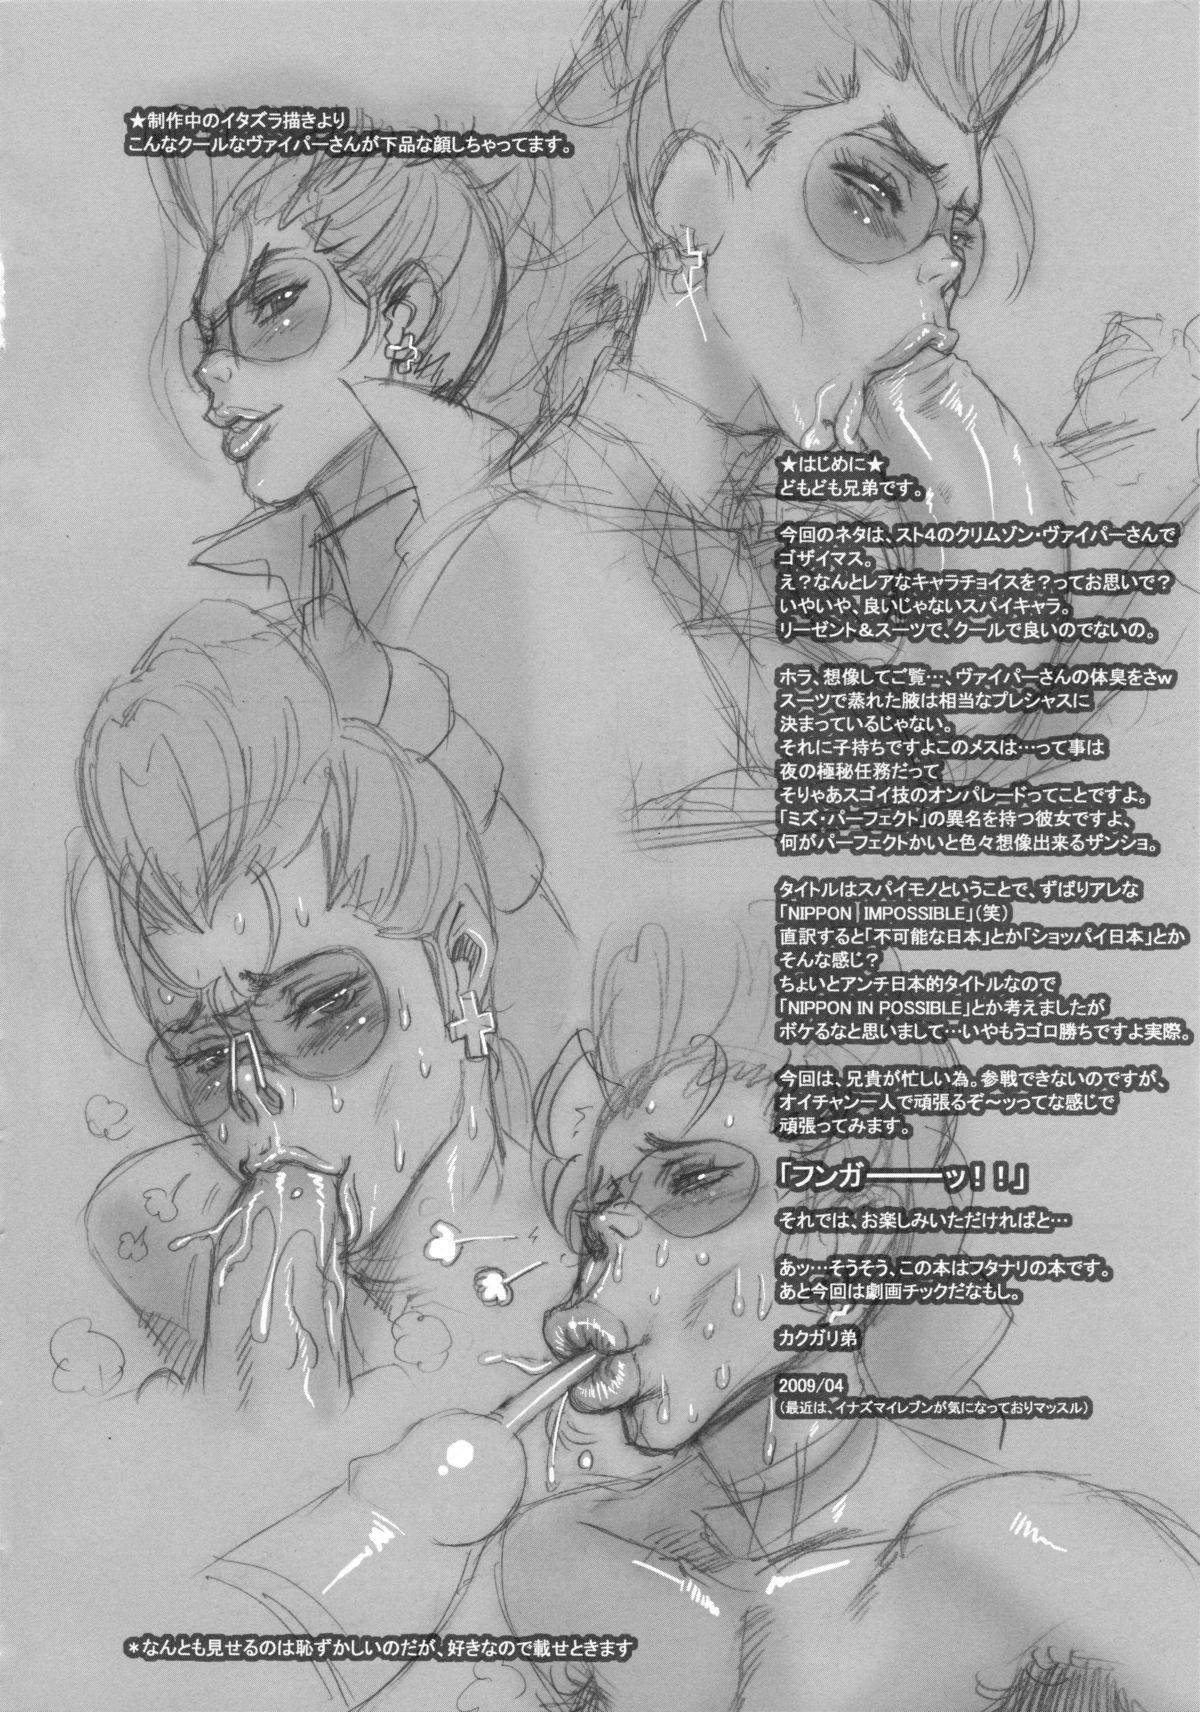 Passion NIPPON IMPOSSIBLE - Street fighter Classroom - Page 3